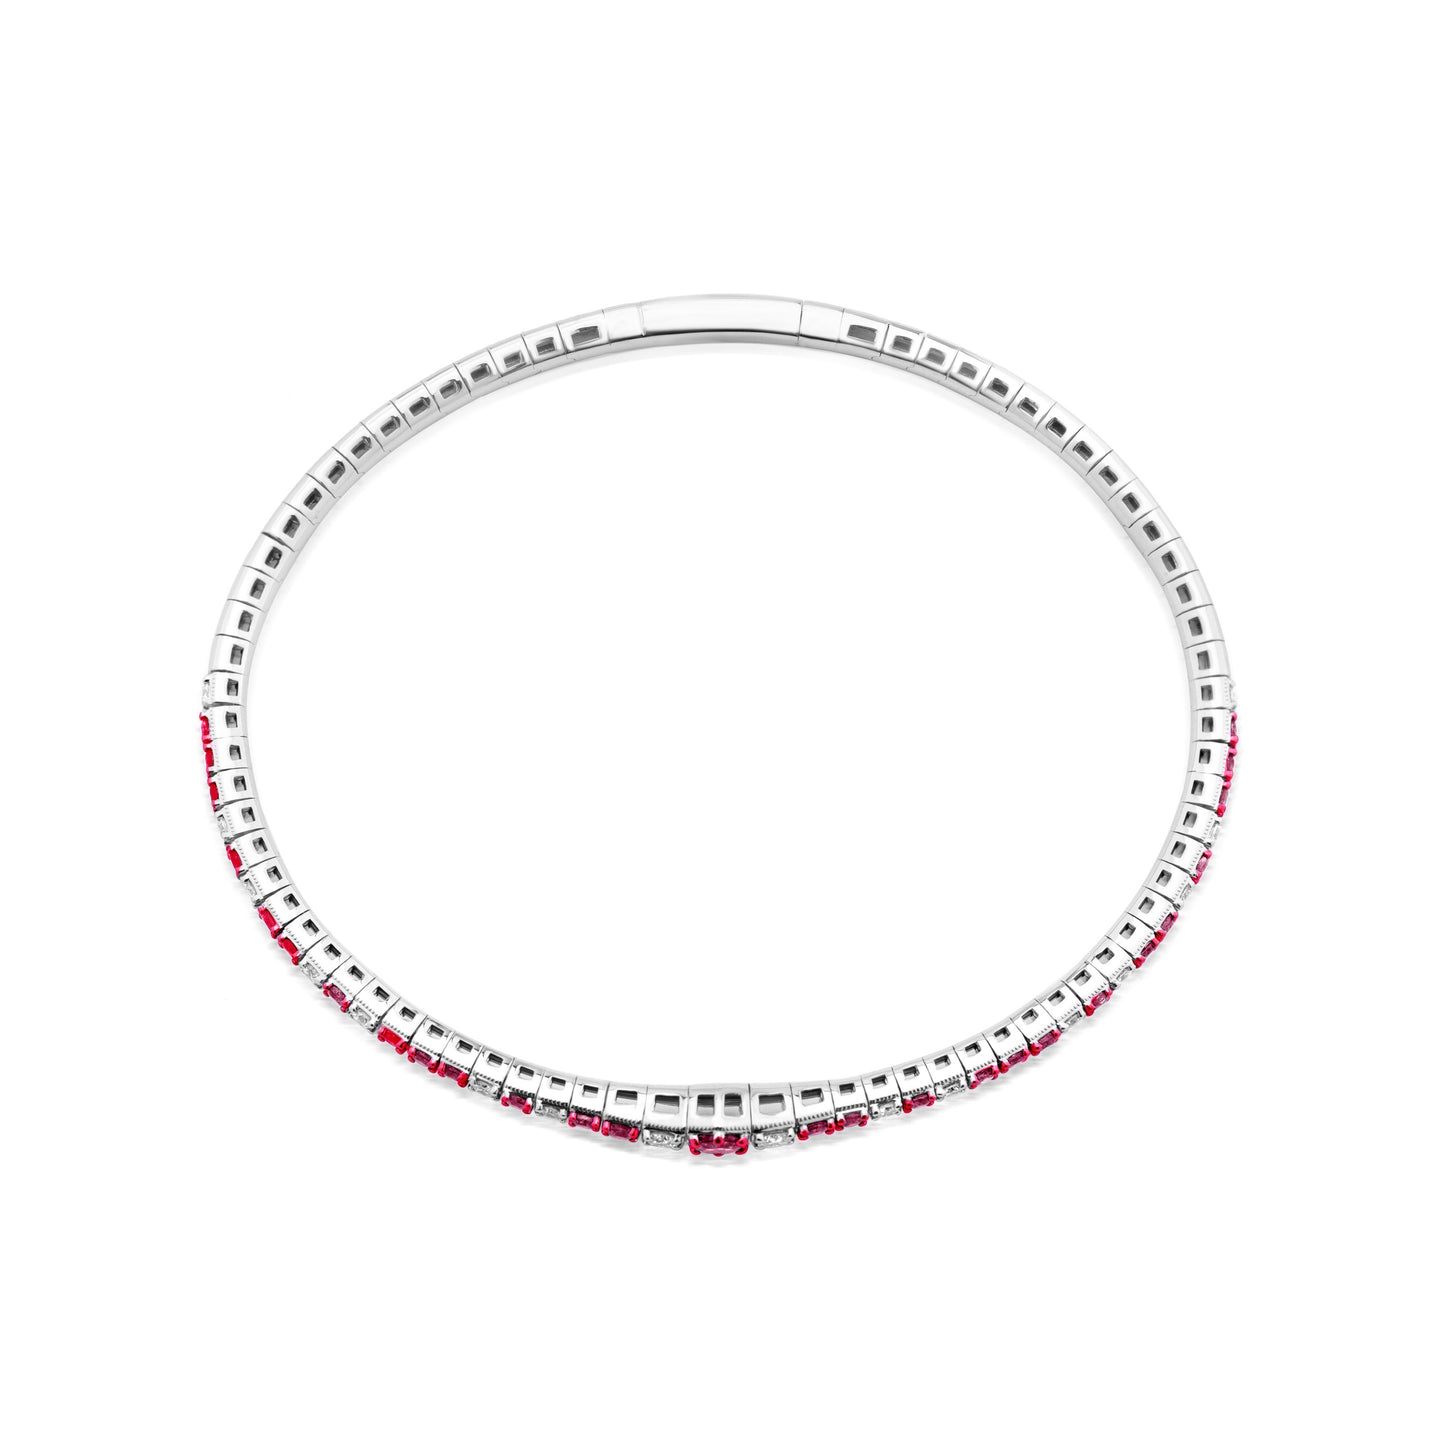 Staggered Ruby and Diamond 18K White Gold Bangle